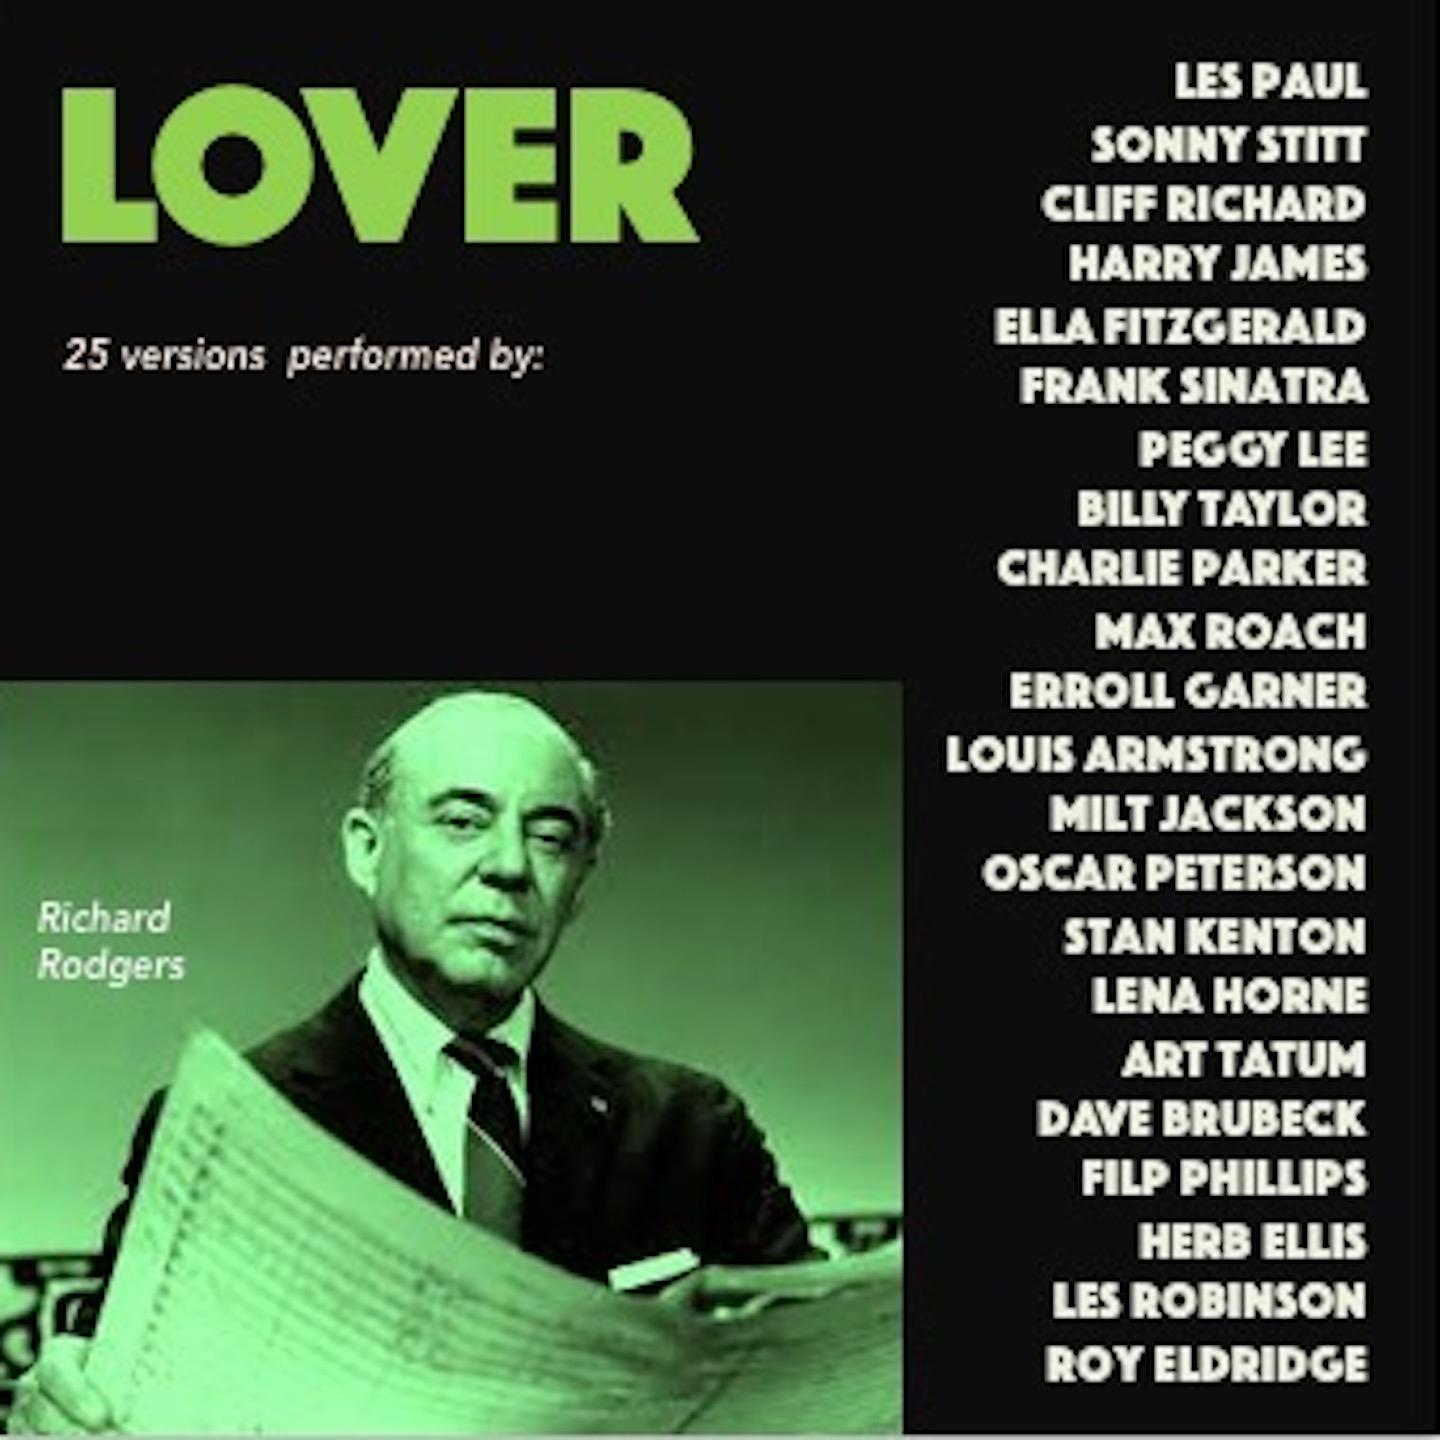 Lover (25 versions performed by:)